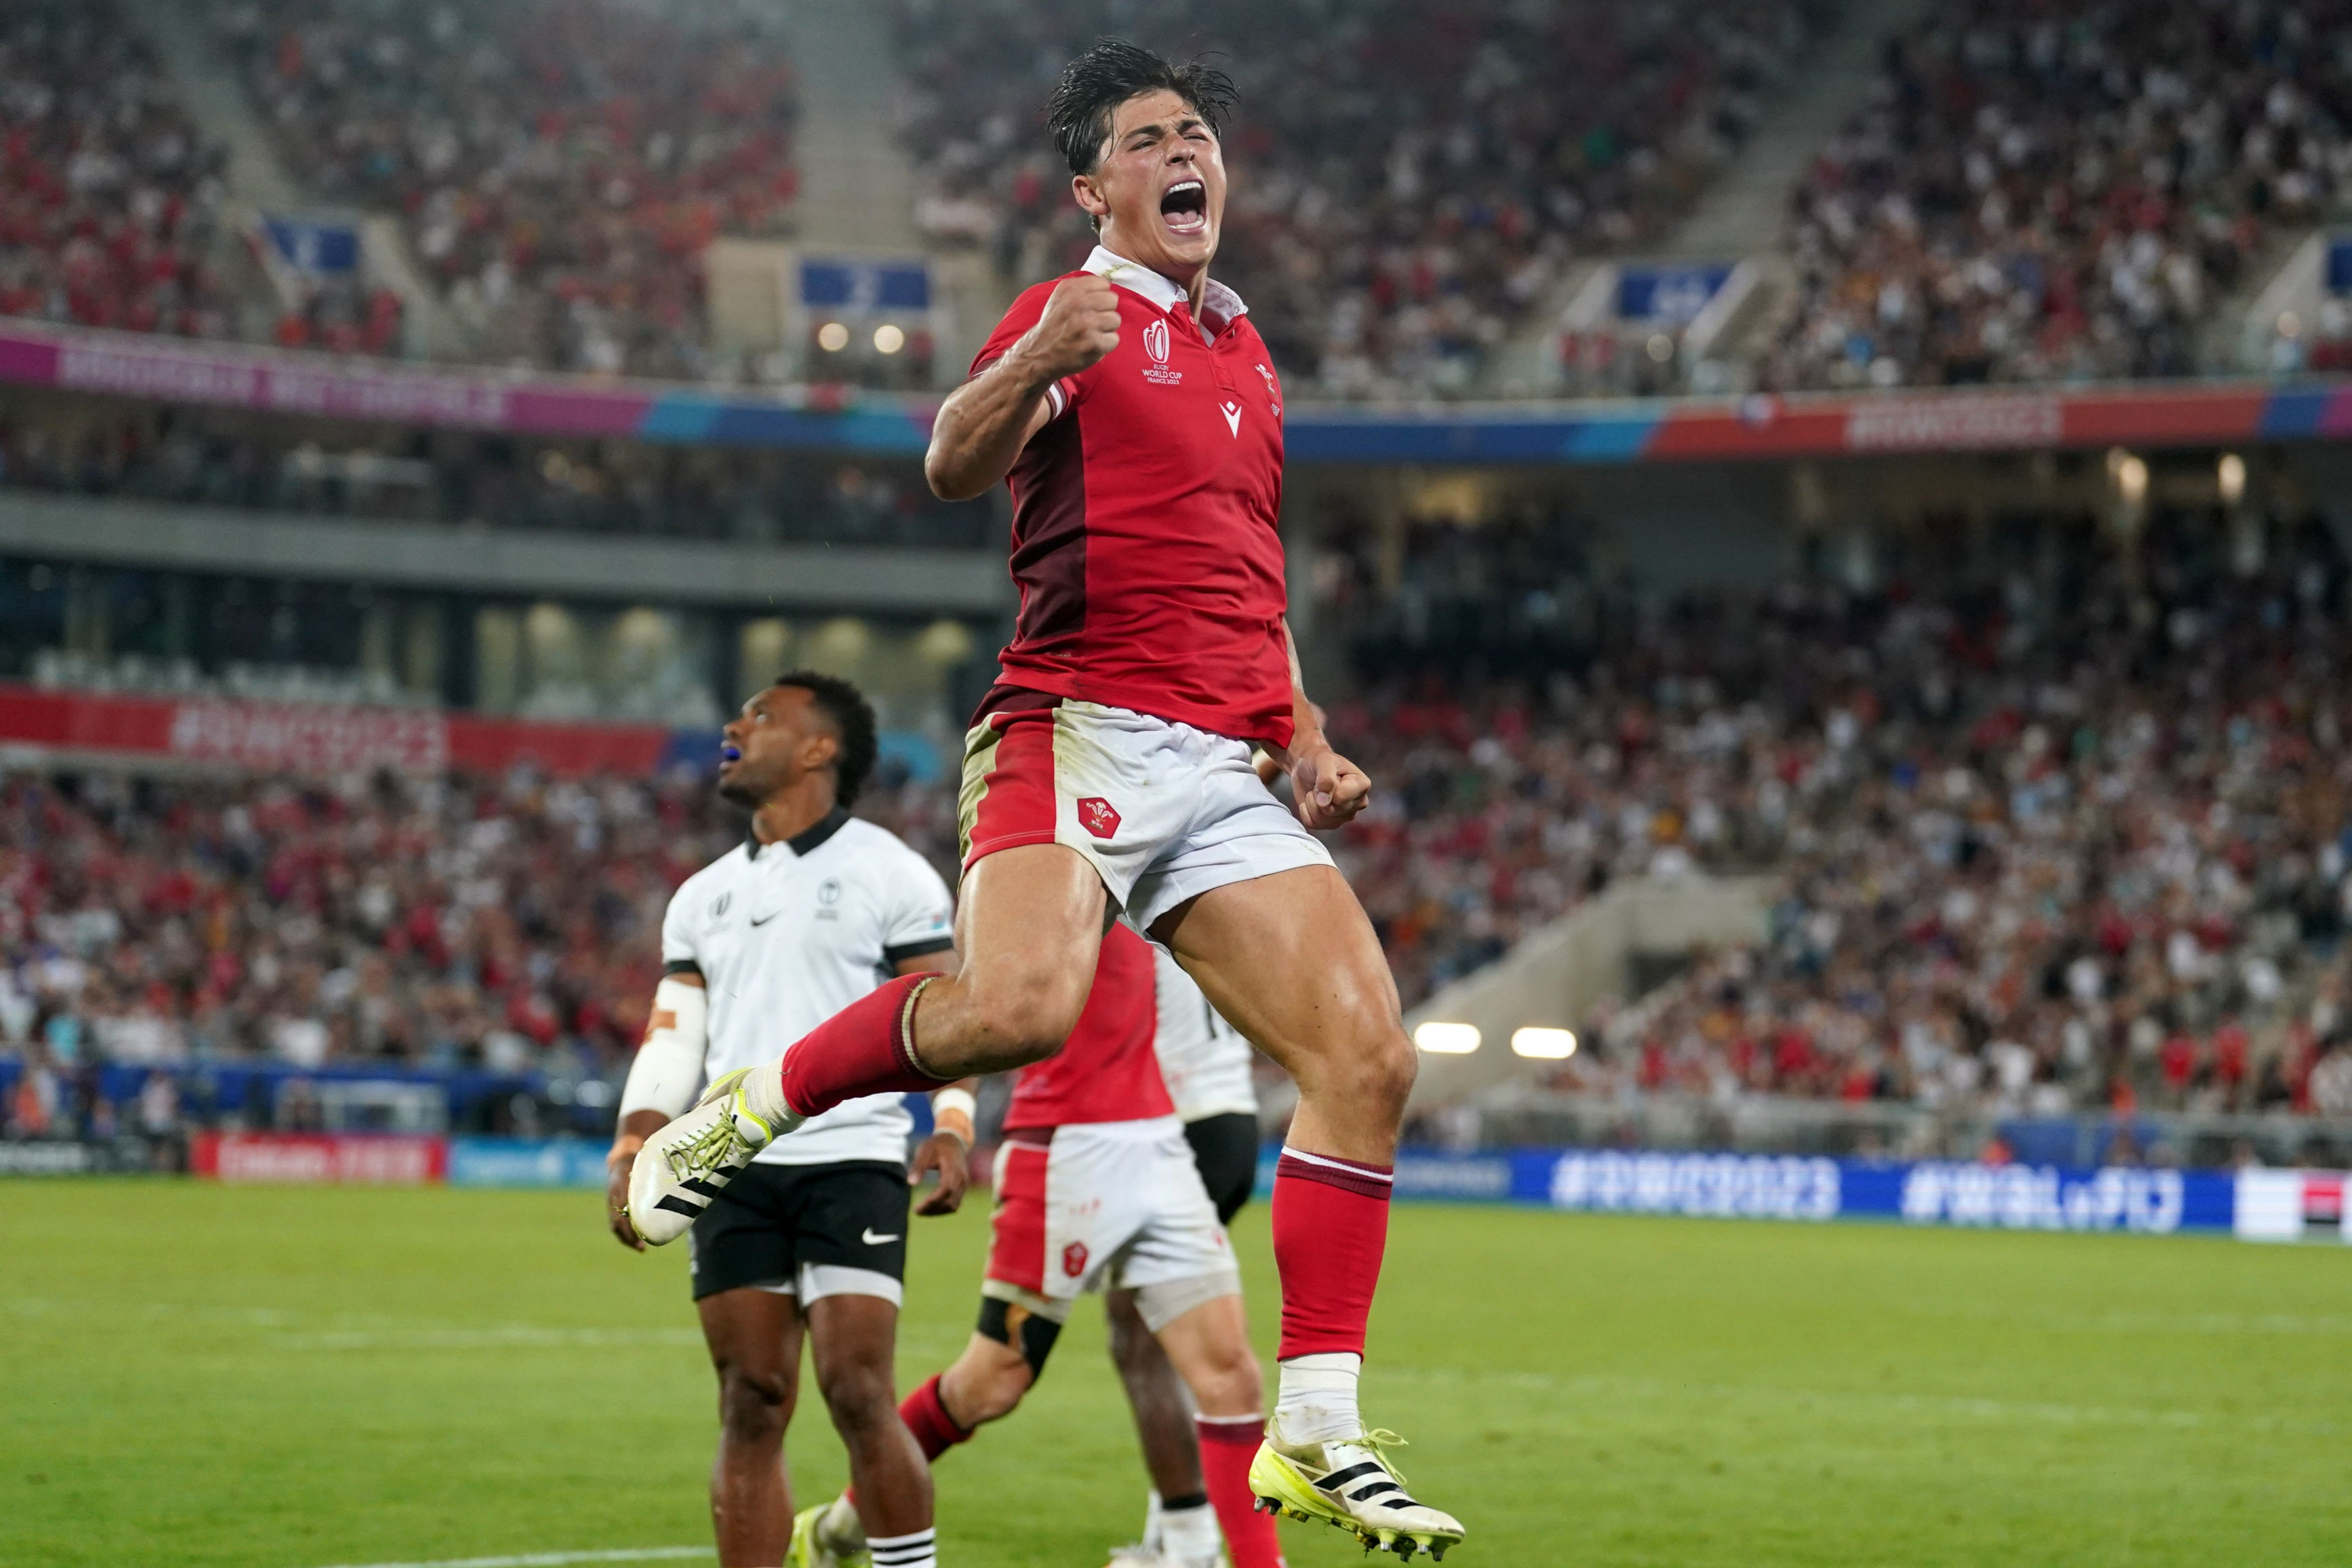 Wales could celebrate a memorable win